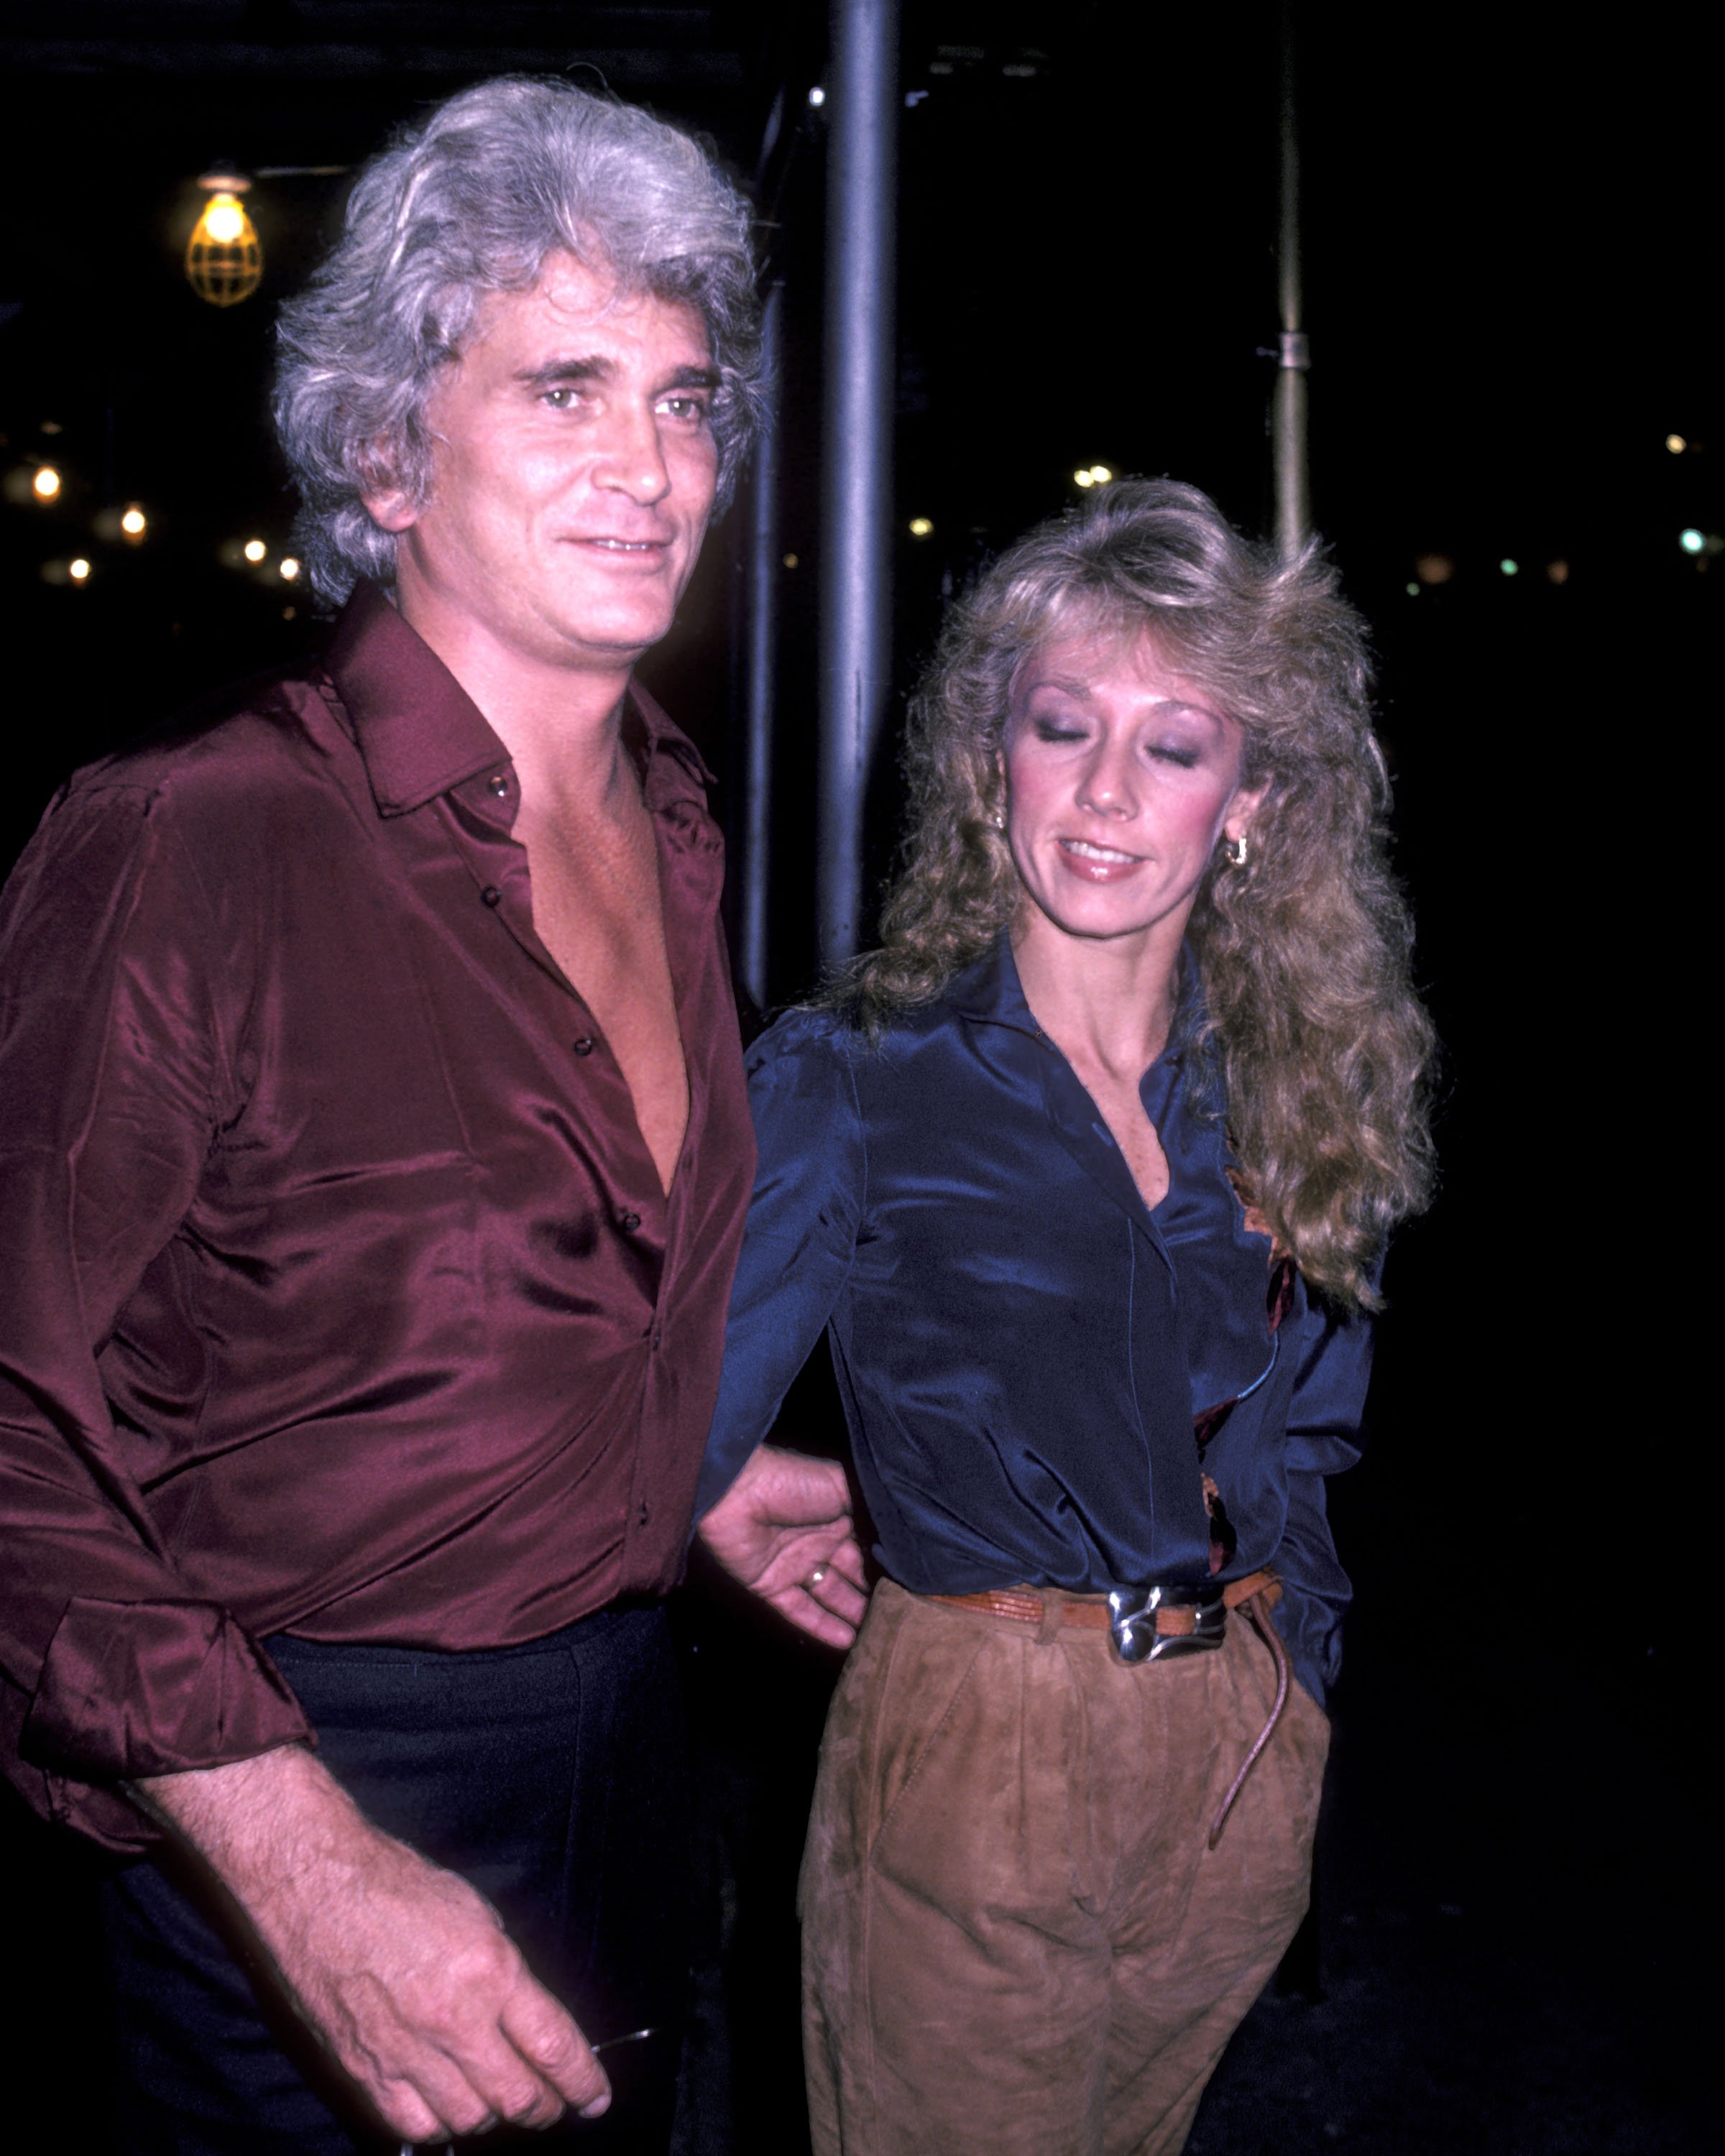 NEW YORK CITY - NOVEMBER 21: Actor Michael Landon and girlfriend Cindy Clerico on November 21, 1982 pose for photographs outside the Sherry Netherlands Hotel in New York City.